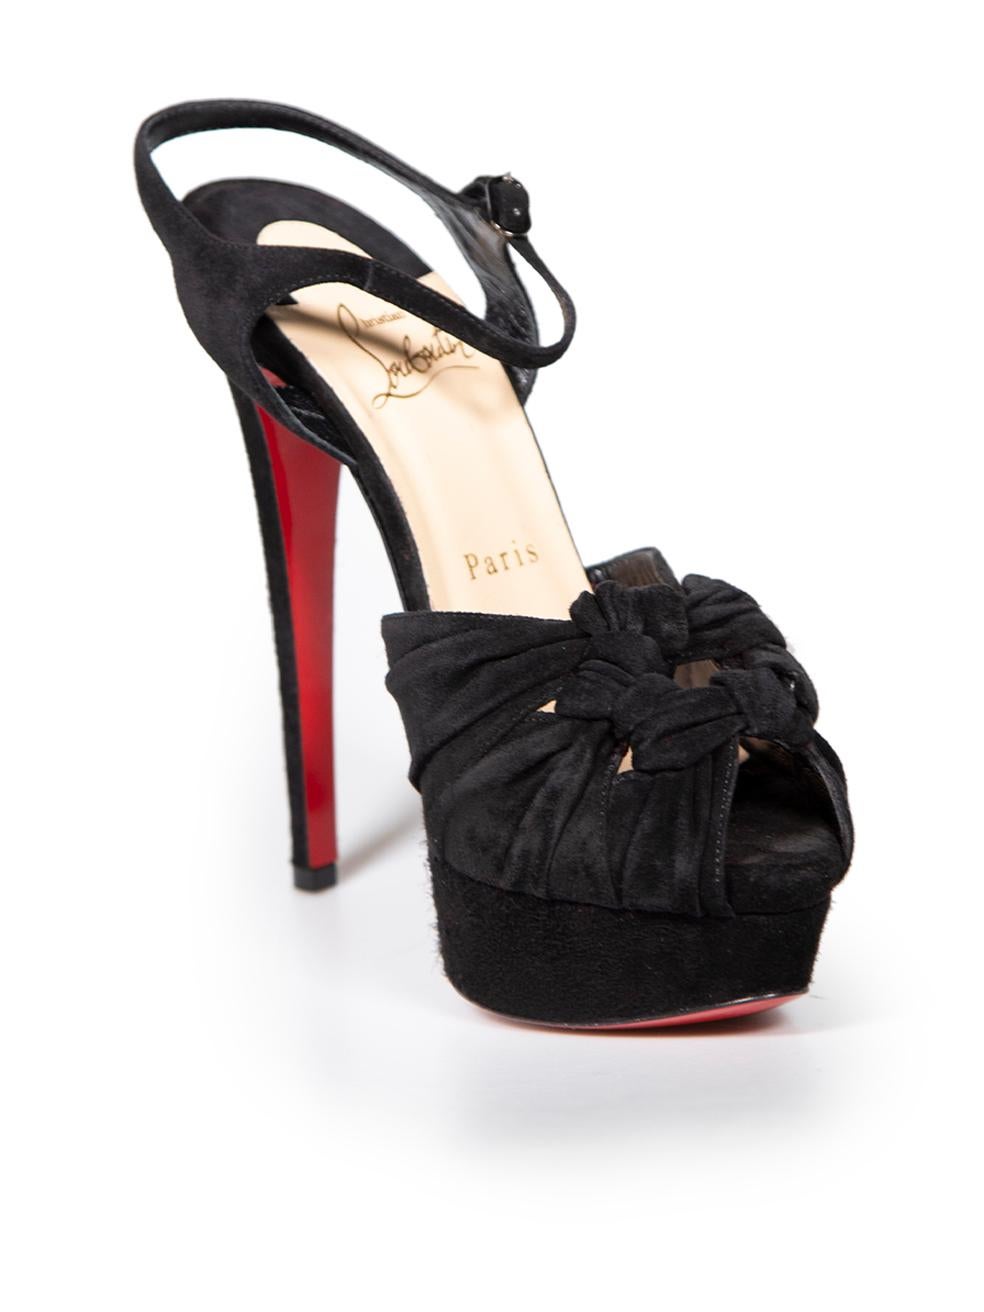 CONDITION is Never worn. No visible wear to shoes is evident on this new Christian Louboutin designer resale item. These shoes come with original box and dust bags.
 
 Details
 Loescadiva
 Black
 Suede
 Heeled sandals
 Knot detail
 Peep toe
